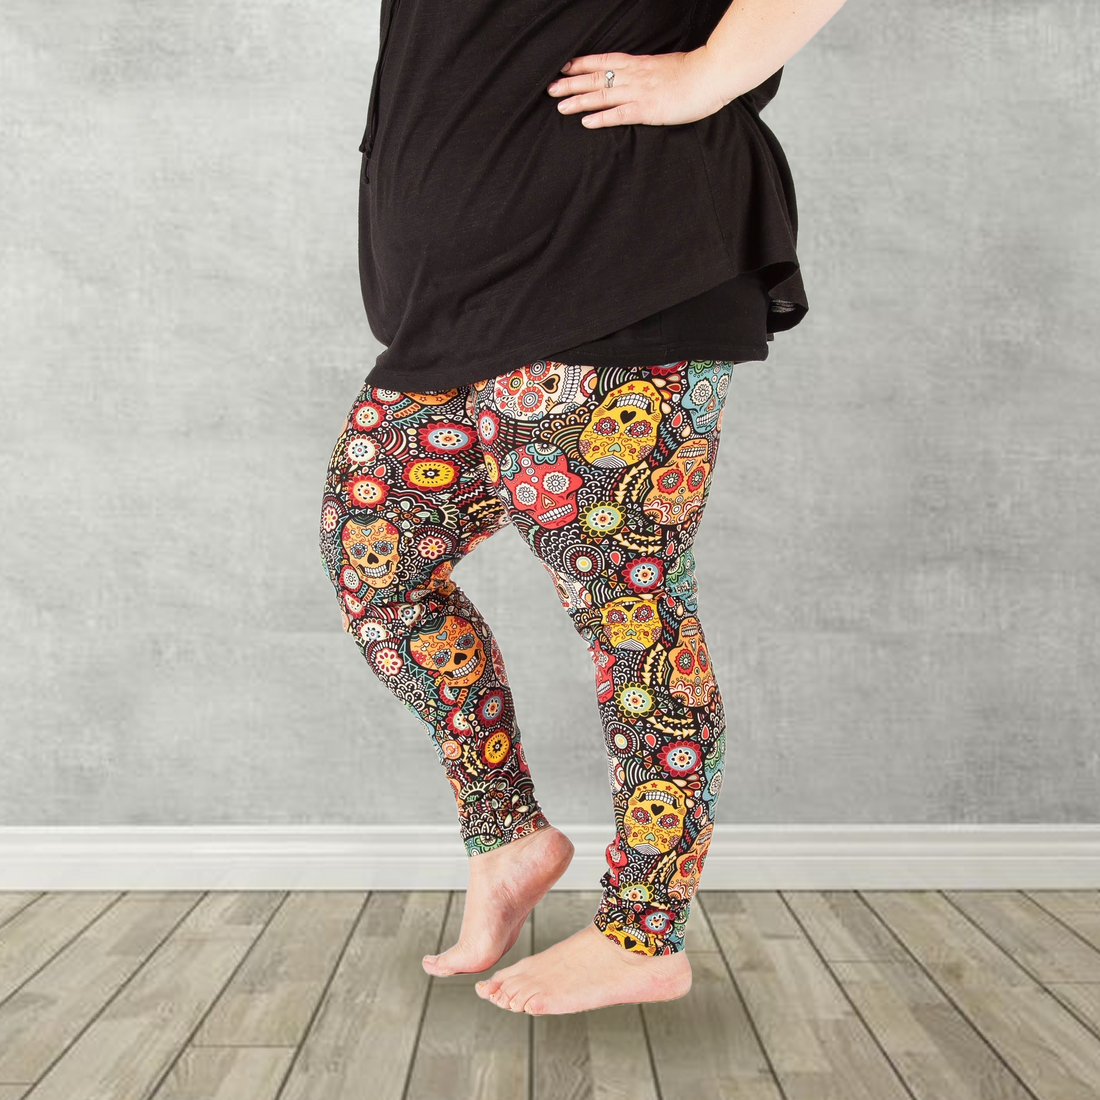 Earth Tone Sugar Skull Leggings - Buttery Soft Stretch for All-Day Wear - Classic Comfort Fit